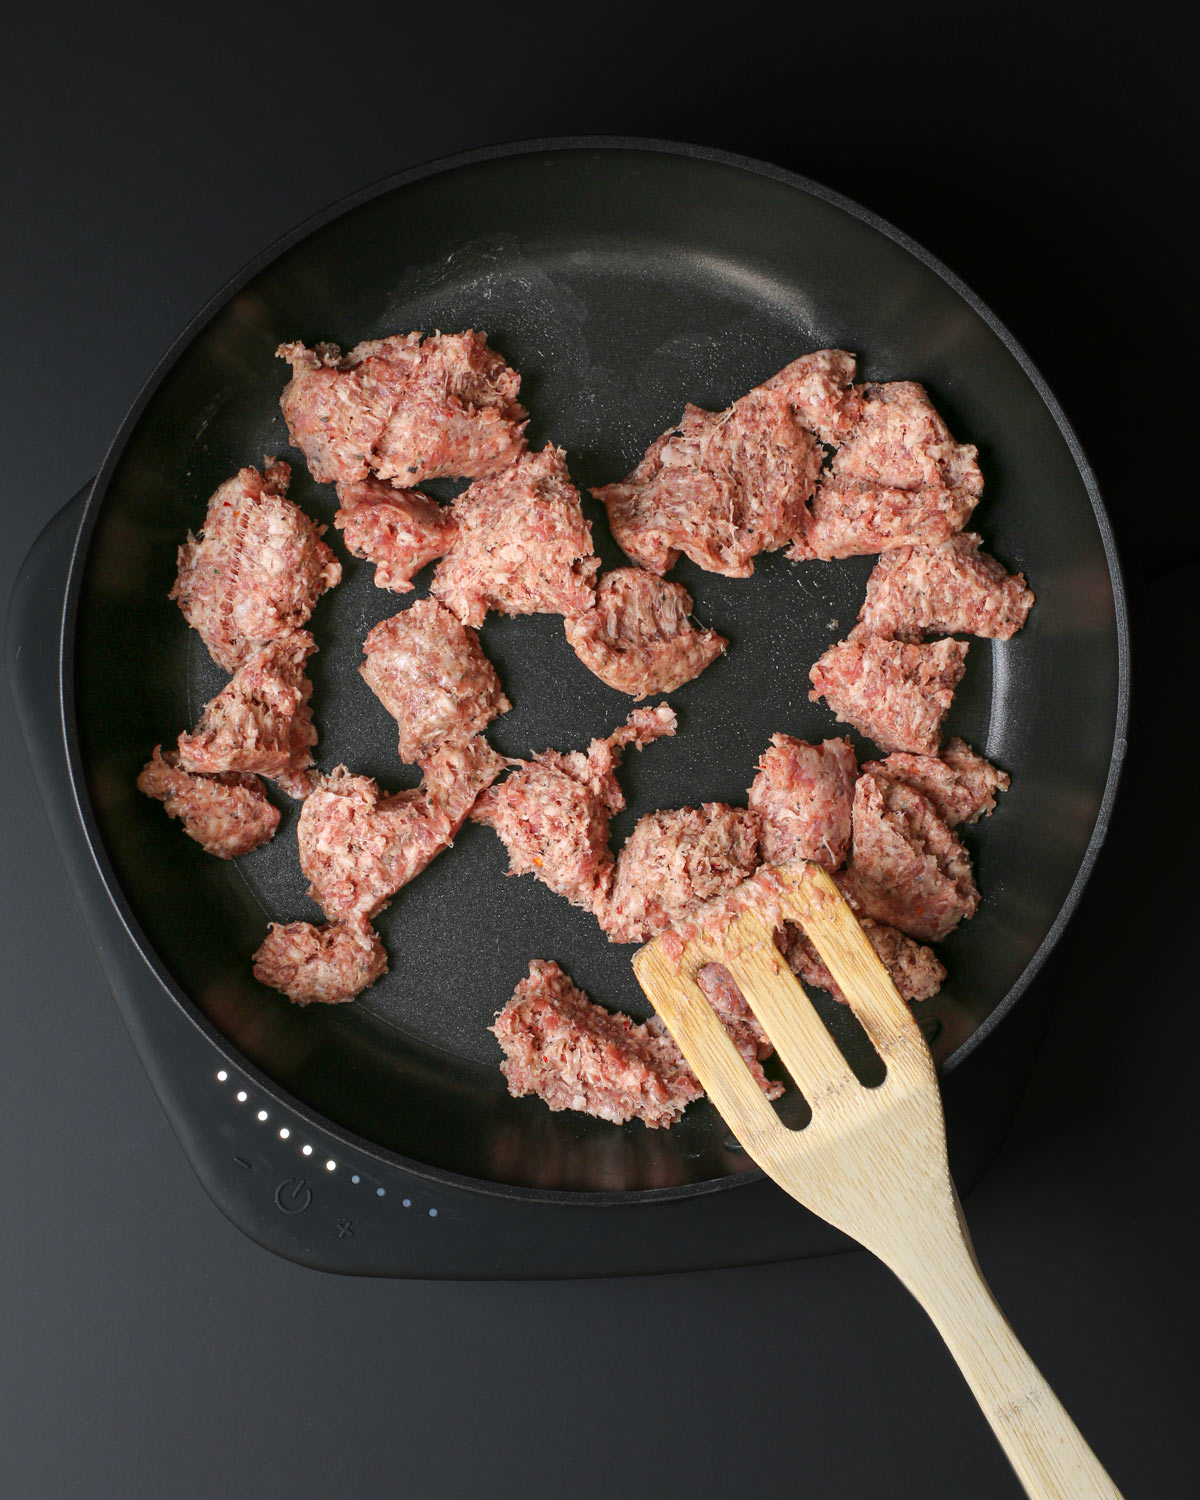 sausage crumbles in skillet with wooden spatula.